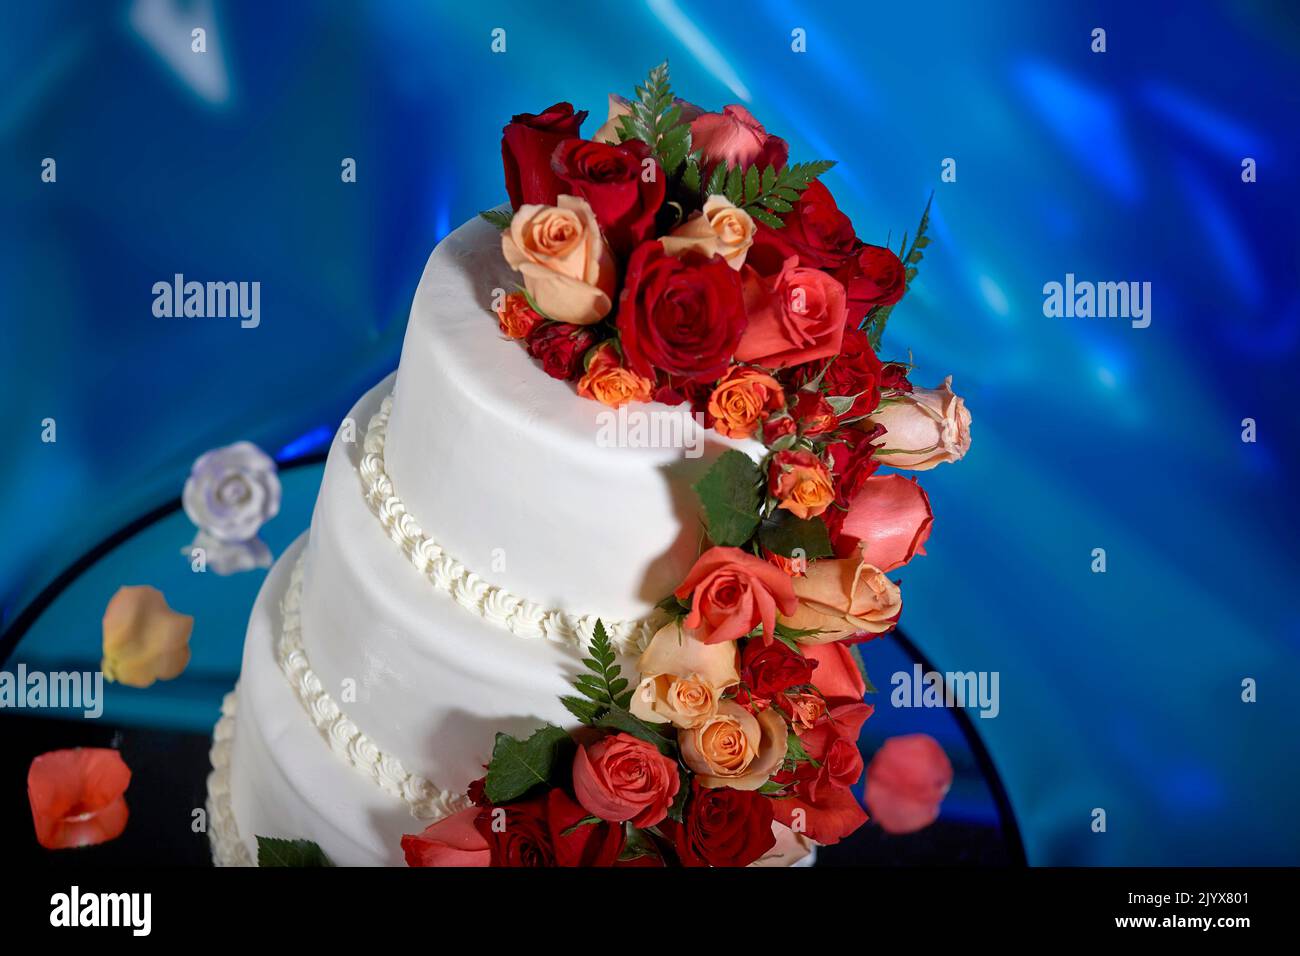 Wedding cake decorated with real roses. Cascading red and pink roses on an elegant three tier, white frosted cake.  Background is a dreamy deep blue Stock Photo